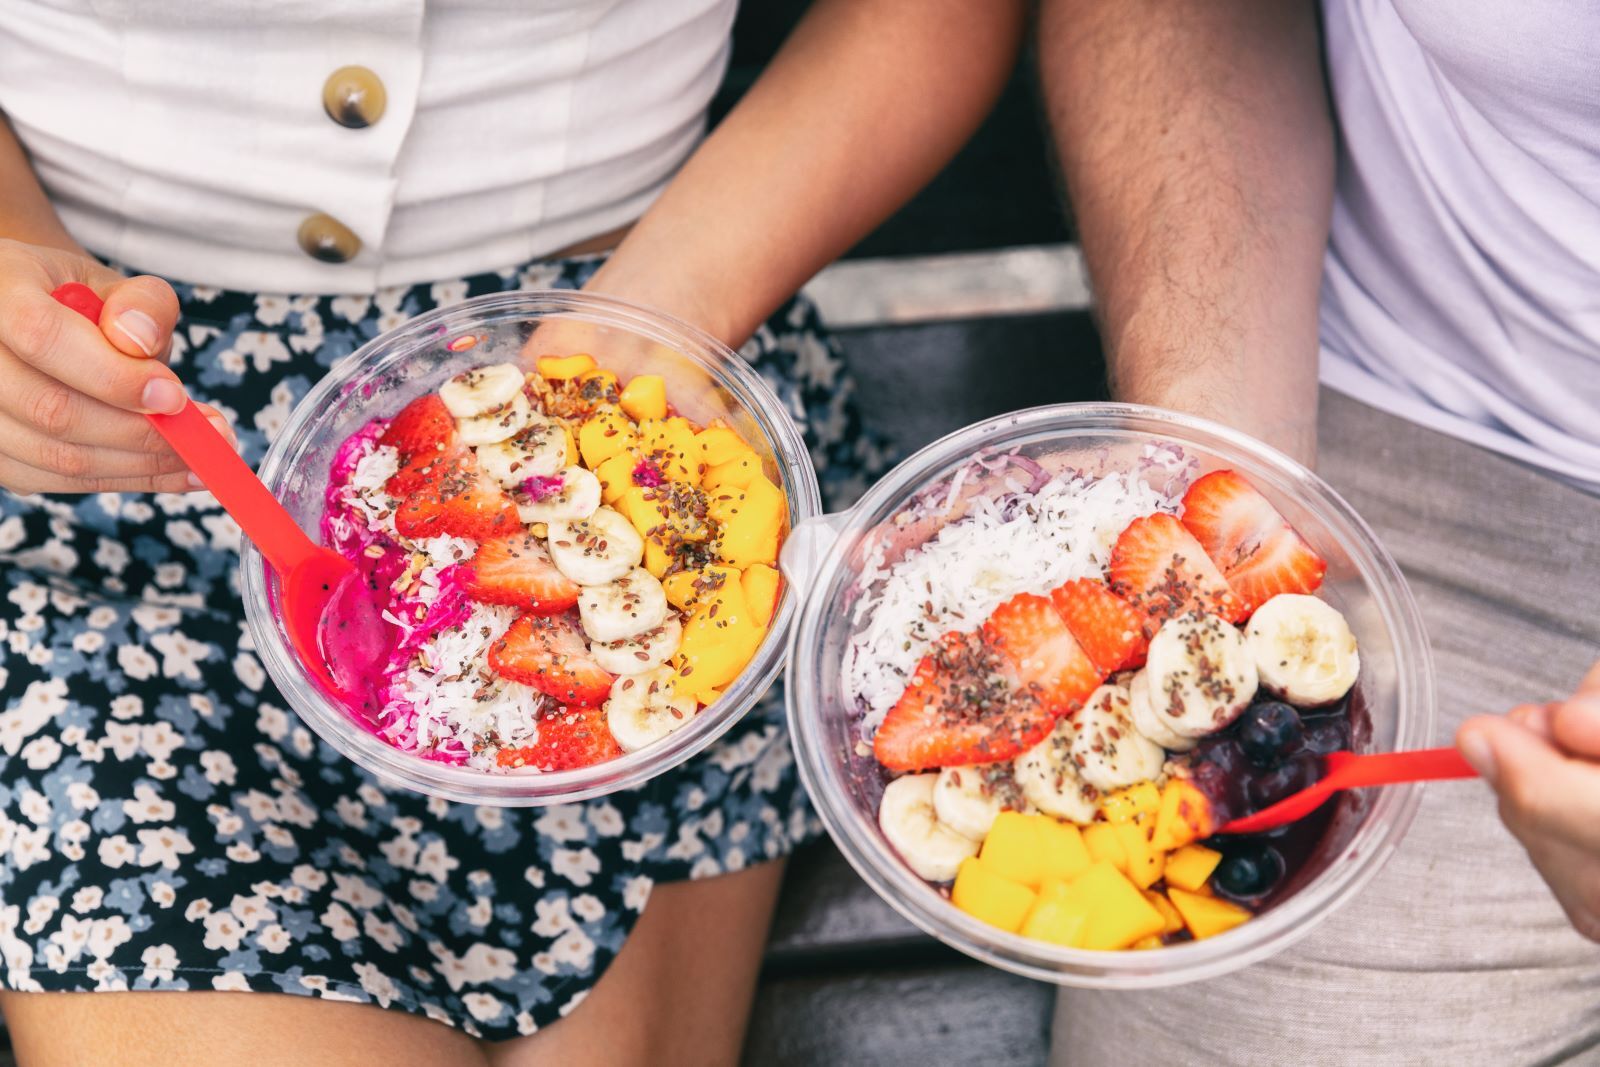 Two people holding acai bowls from restaurant in Kauai, Hawaii